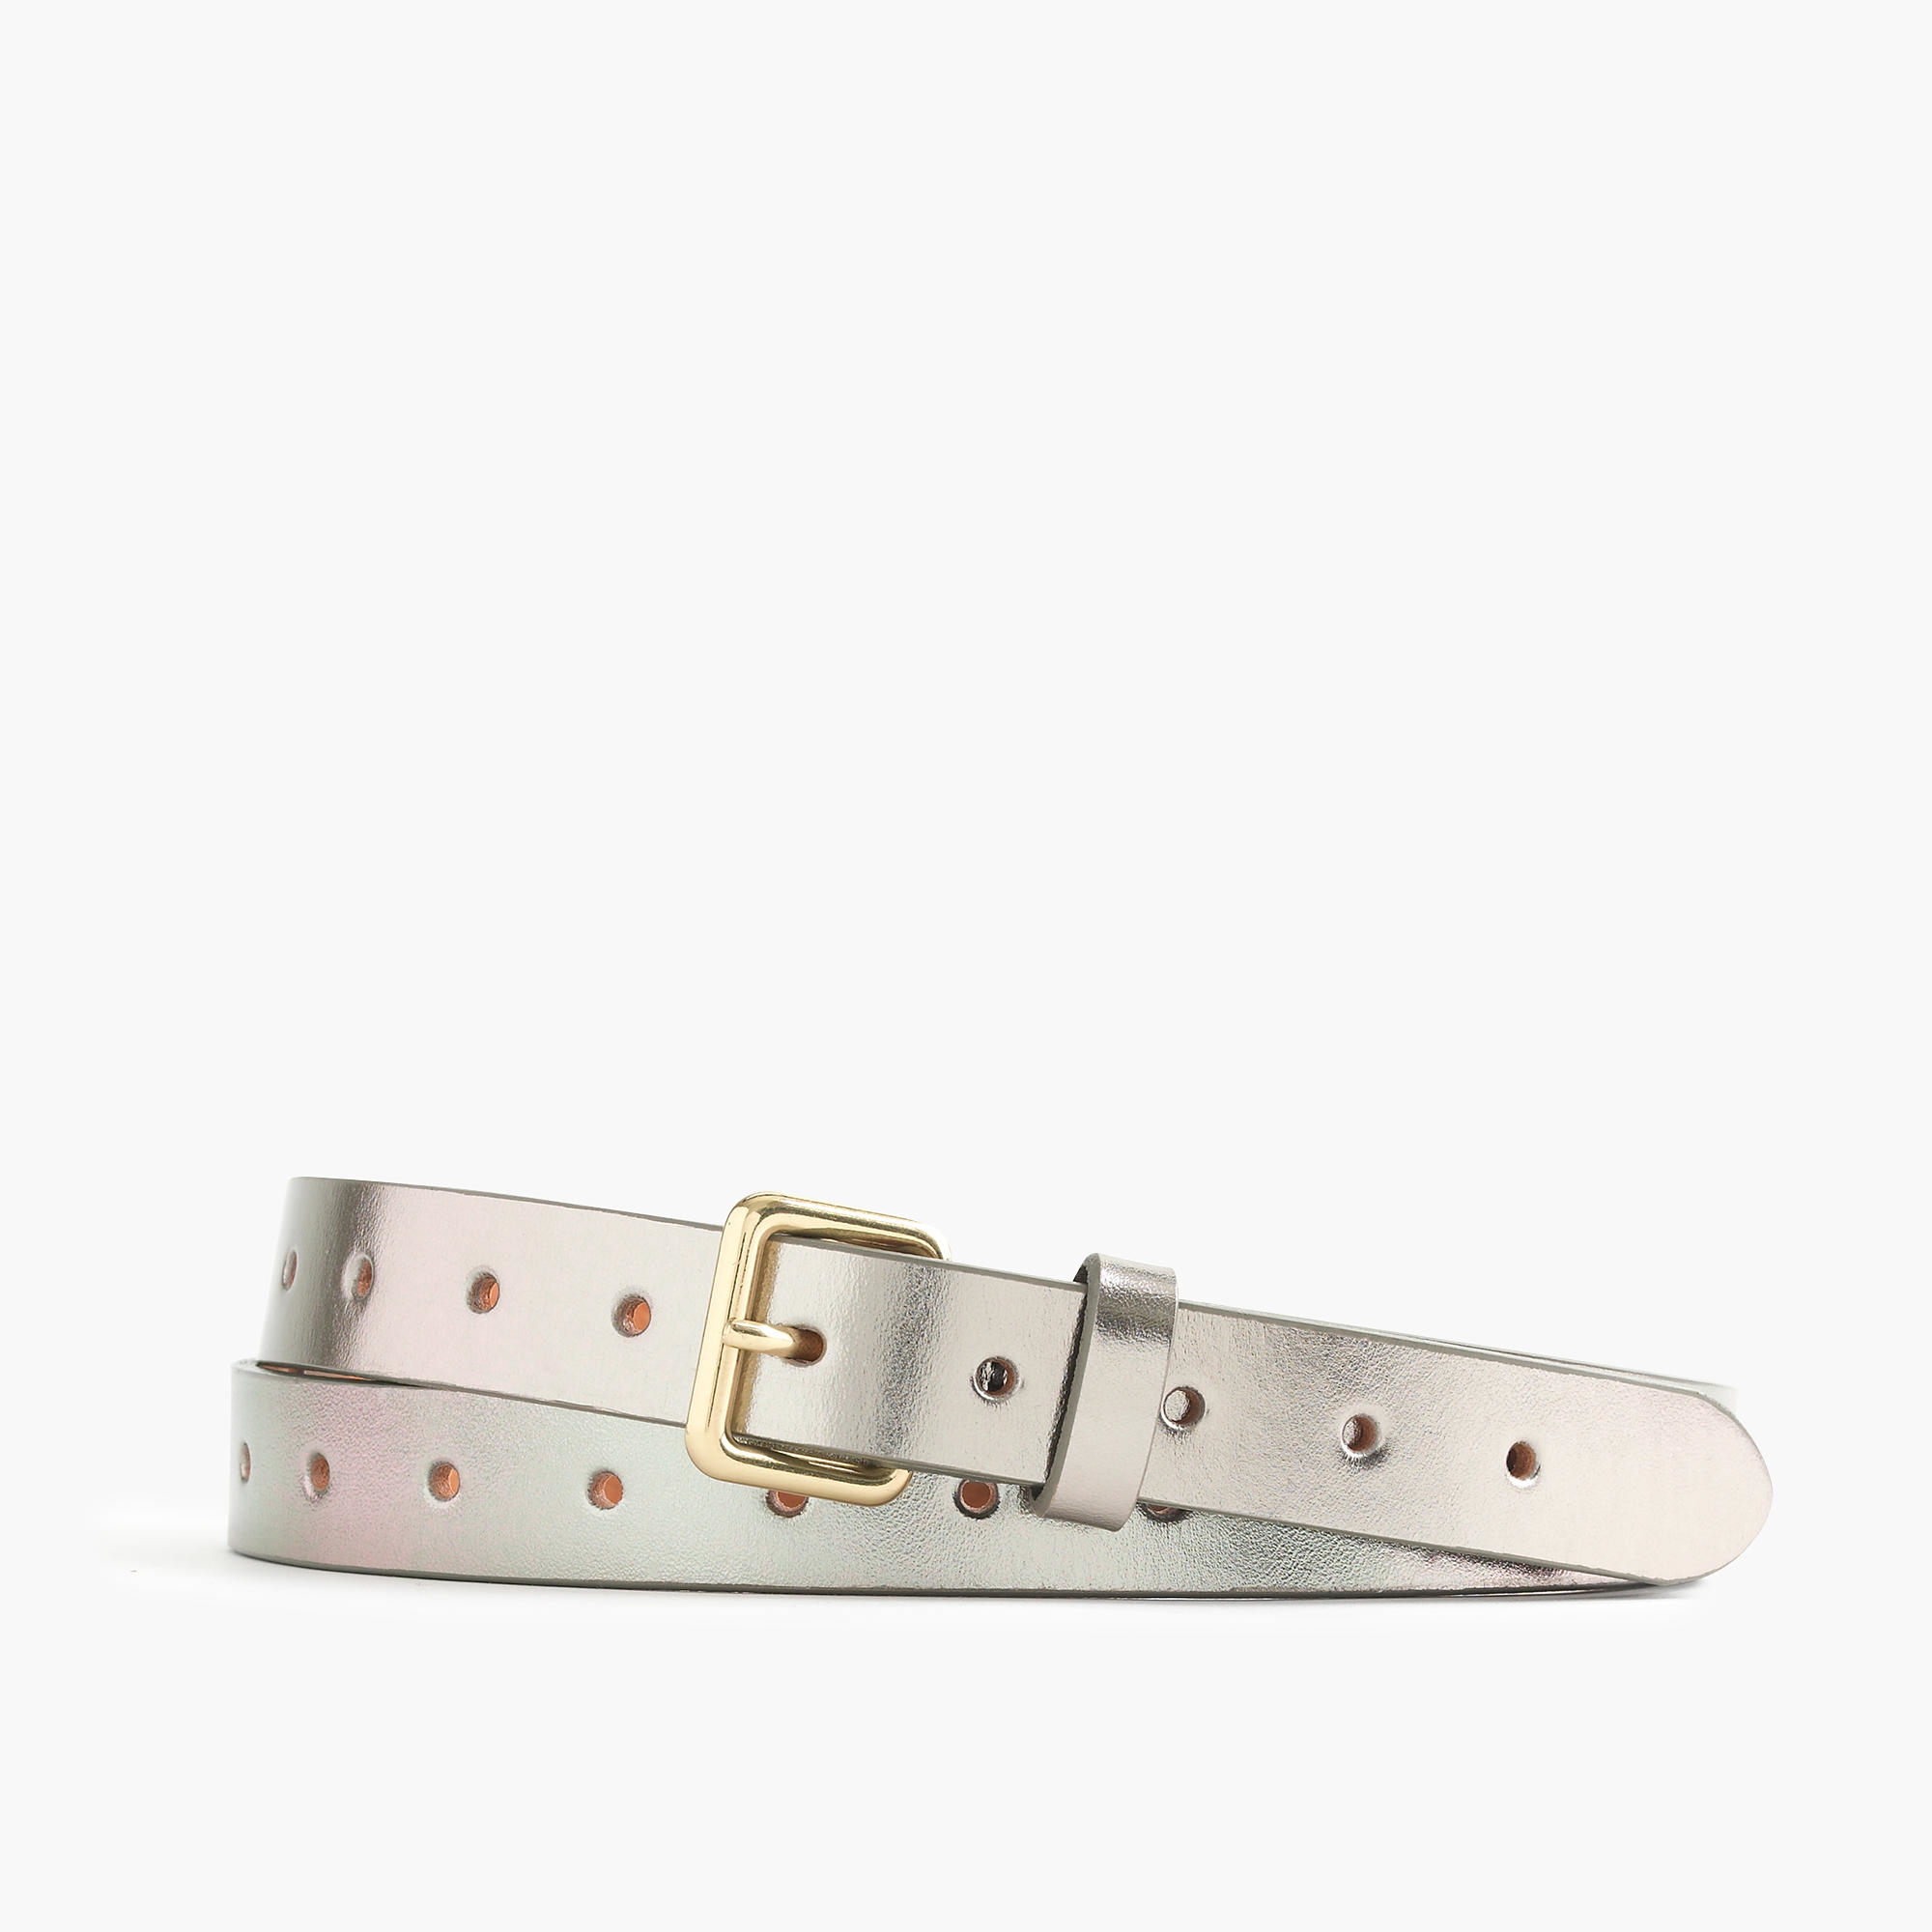 J.crew Perforated Leather Belt in Silver (metallic silver) | Lyst